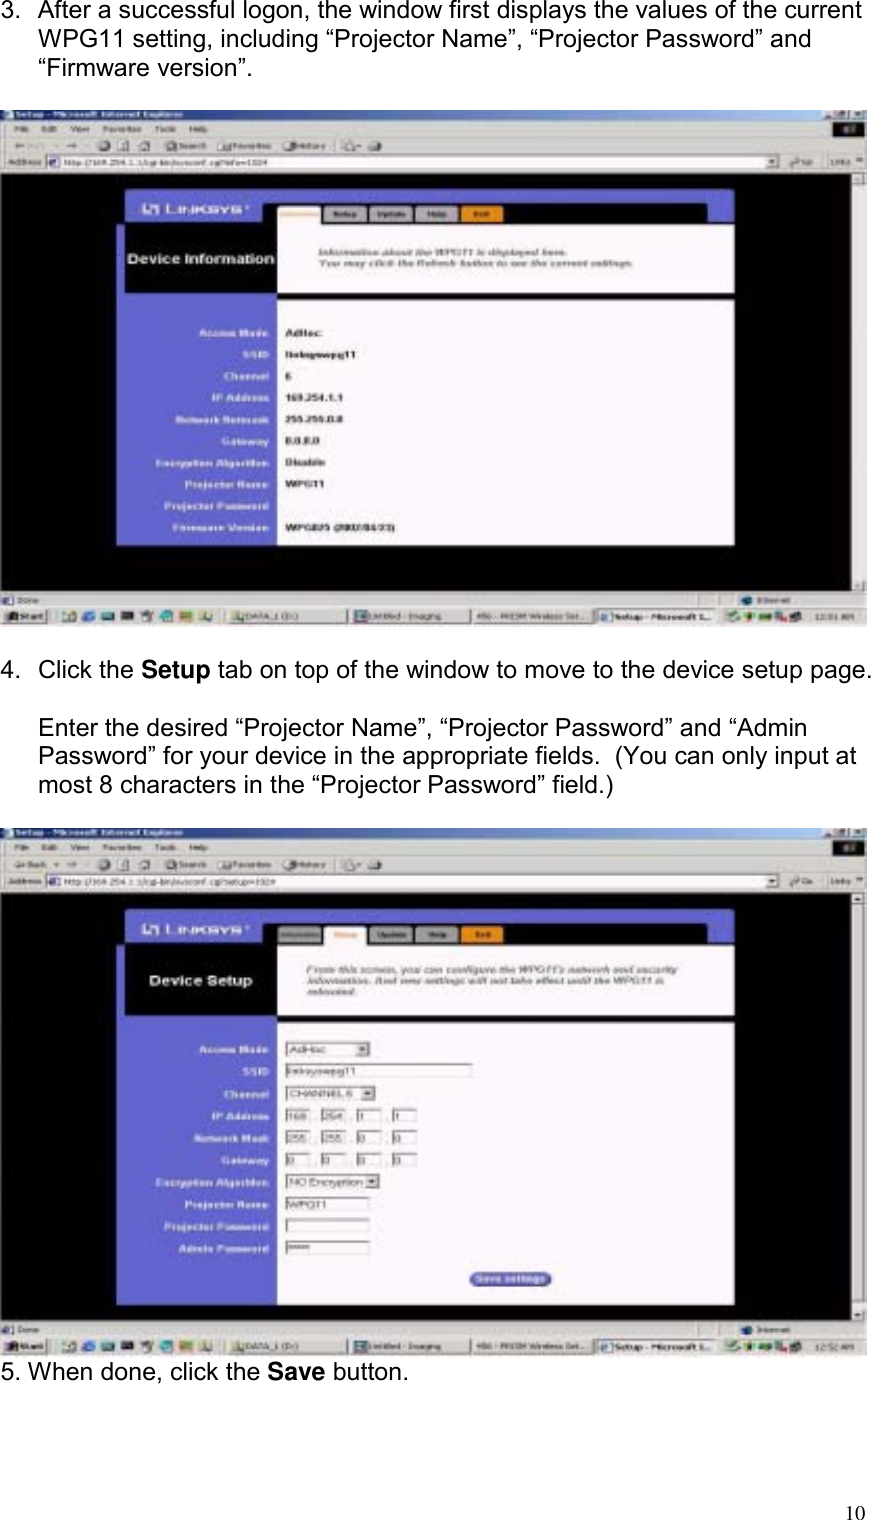 3.  After a successful logon, the window first displays the values of the current WPG11 setting, including “Projector Name”, “Projector Password” and “Firmware version”.    4. Click the Setup tab on top of the window to move to the device setup page.    Enter the desired “Projector Name”, “Projector Password” and “Admin Password” for your device in the appropriate fields.  (You can only input at most 8 characters in the “Projector Password” field.)   5. When done, click the Save button.  10